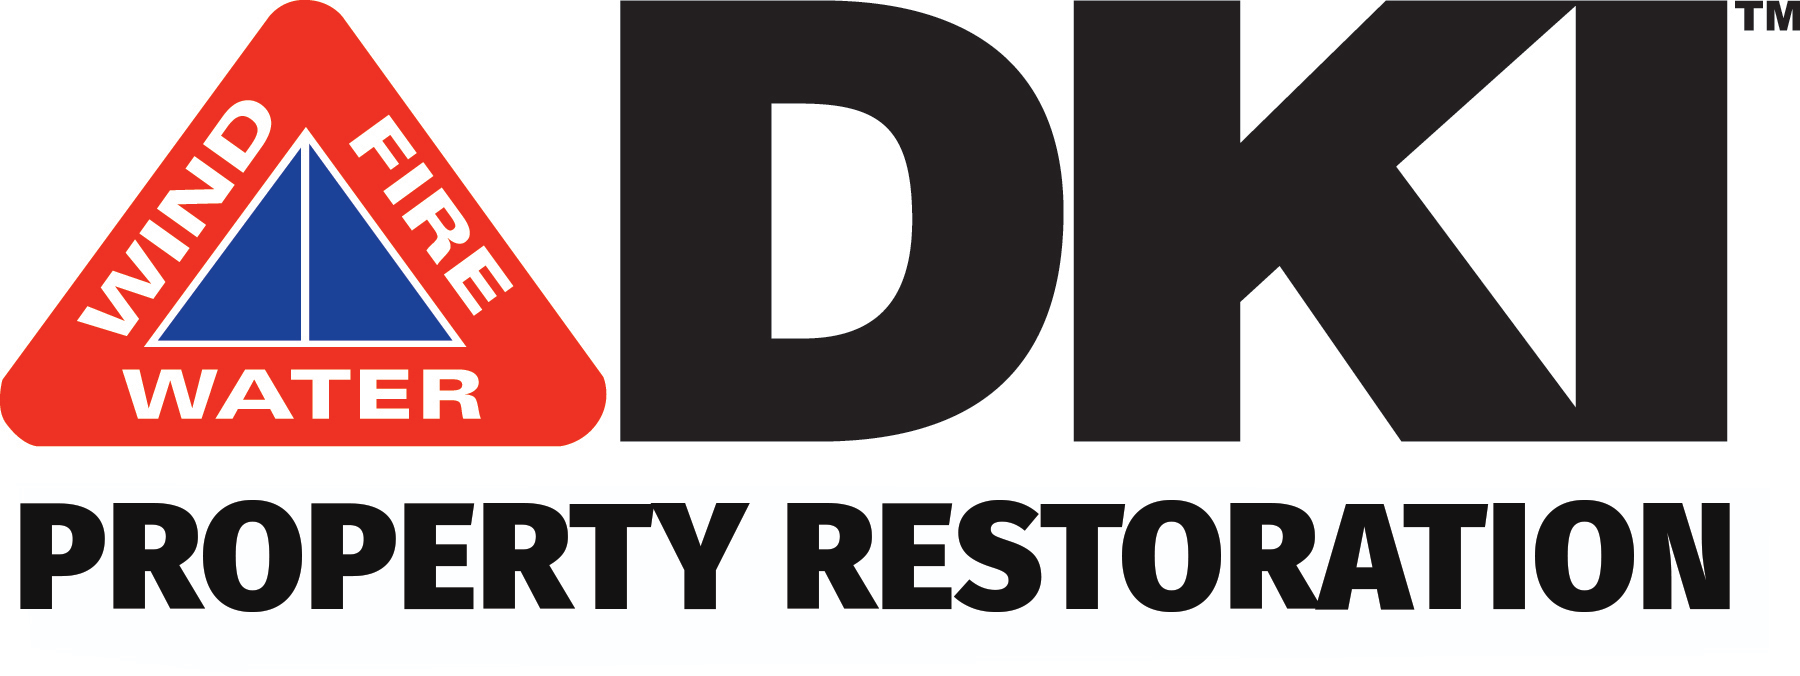 DKI Property Restoration logo with elements for wind, fire, water